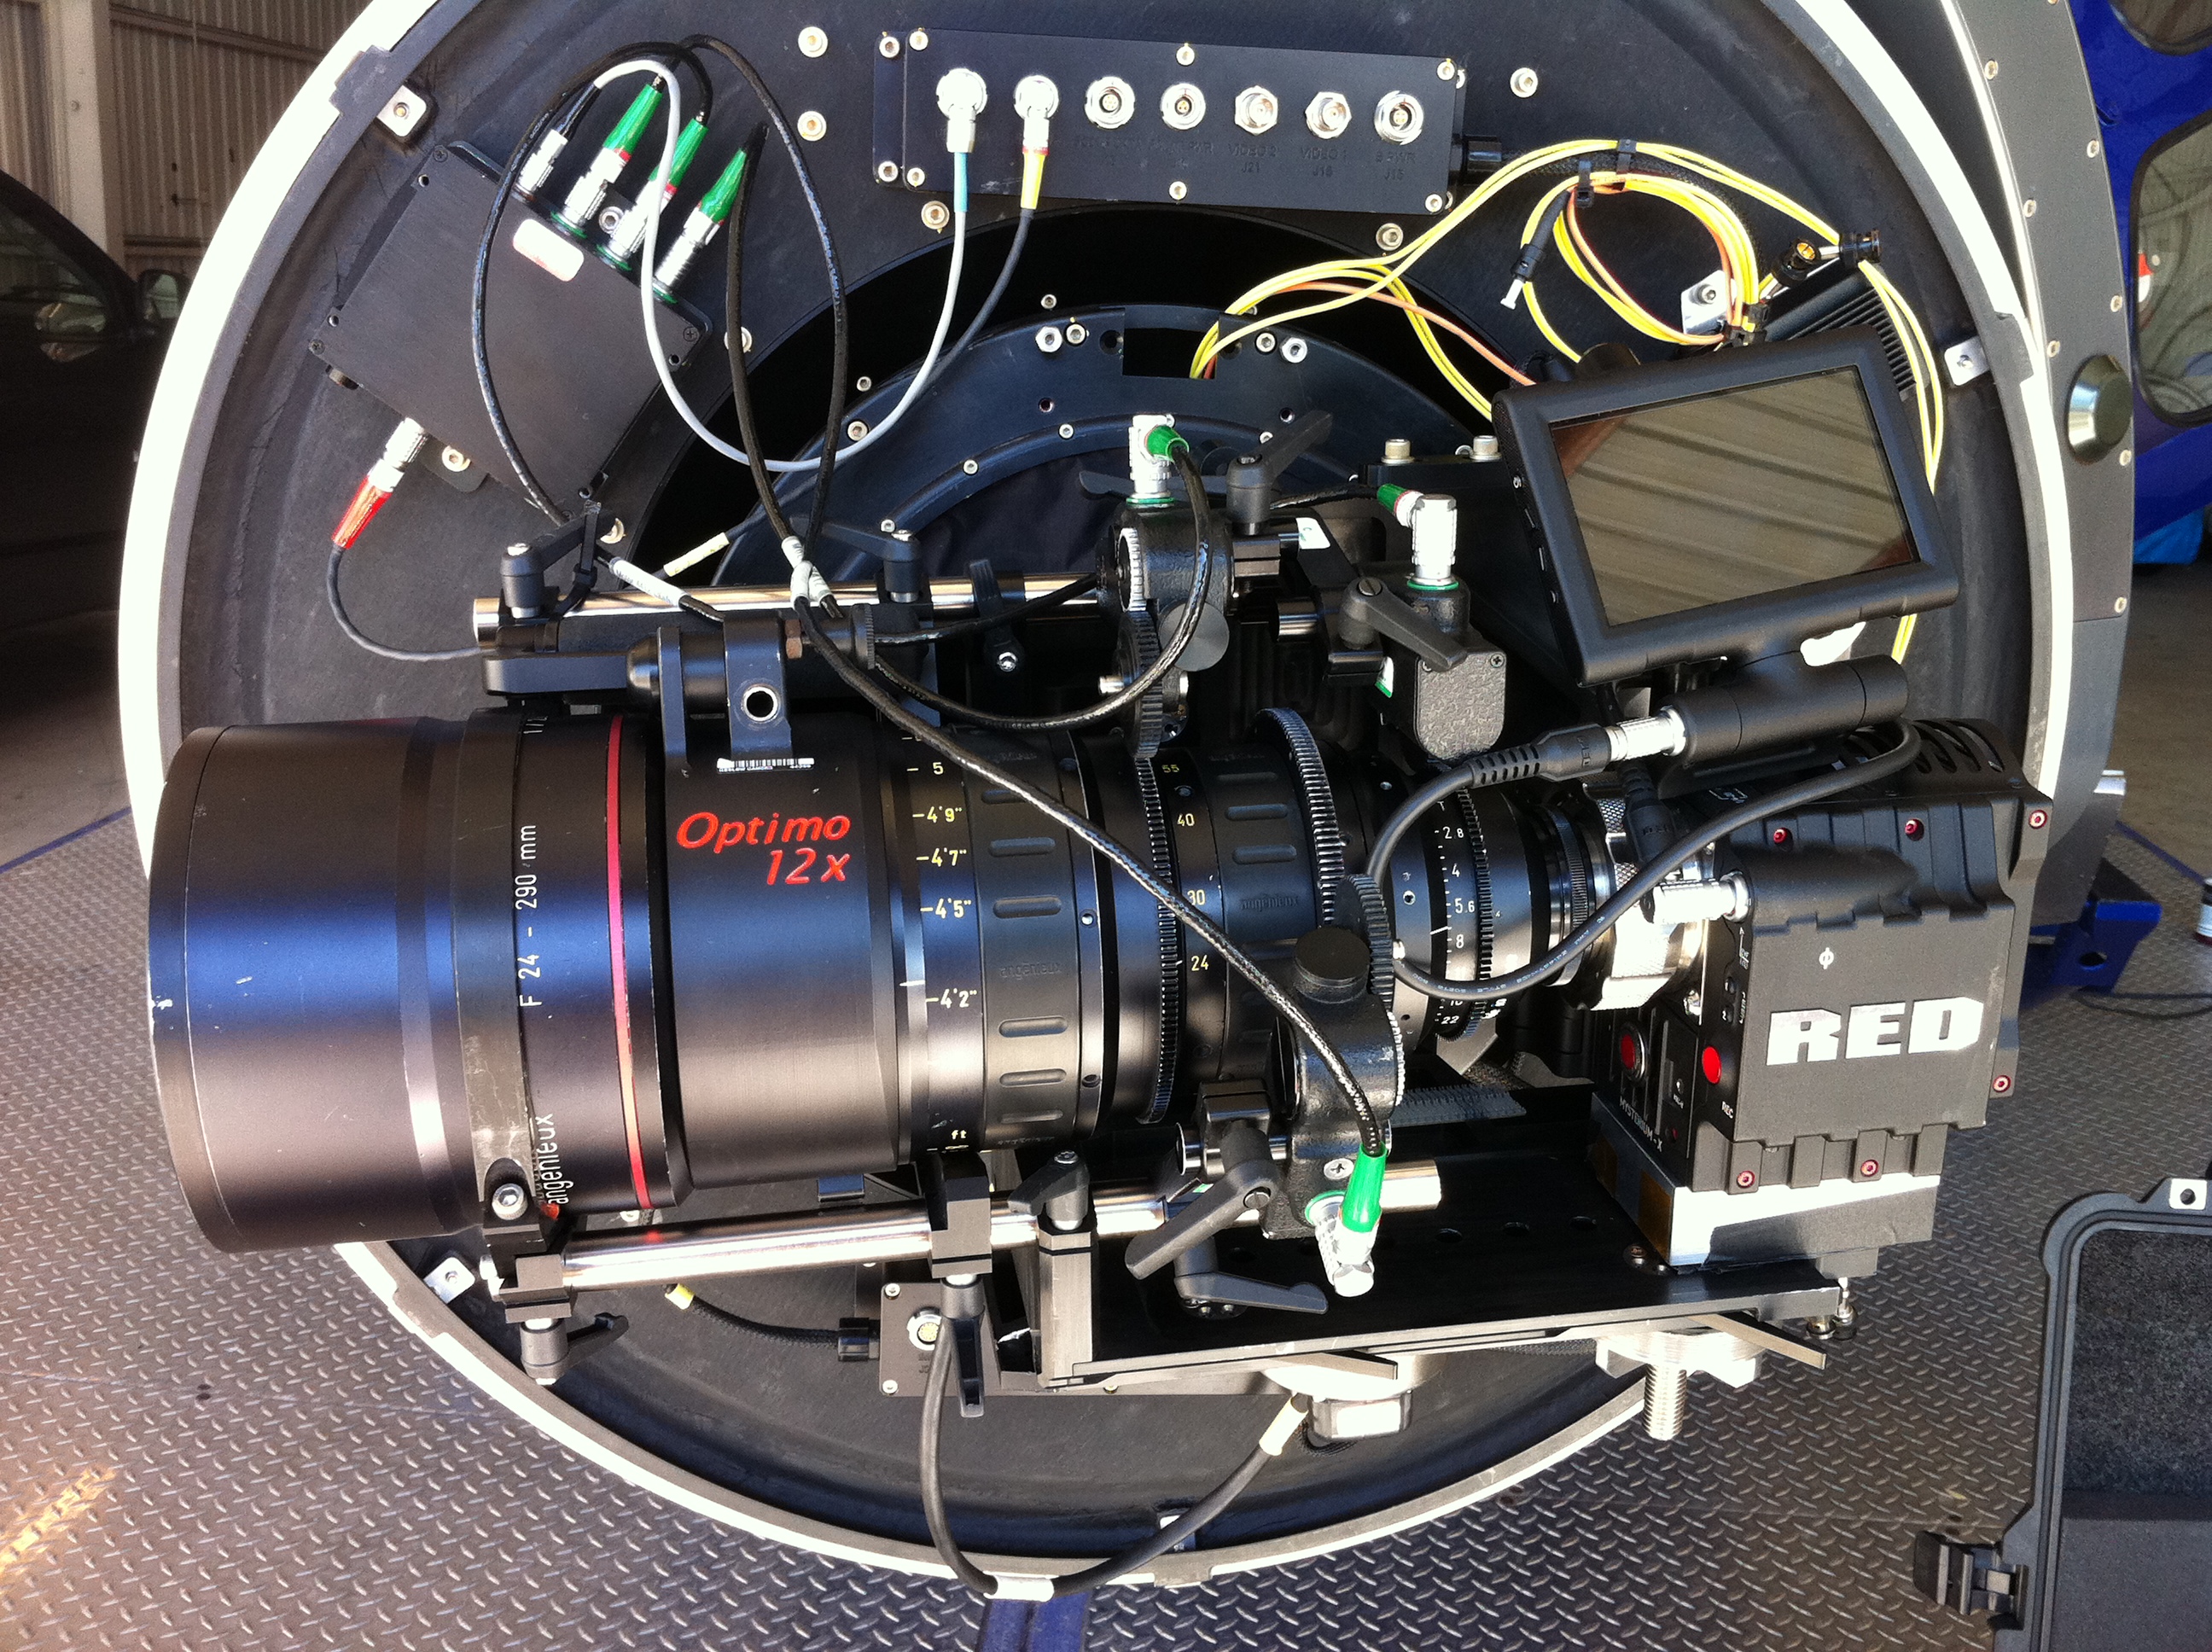 First Aerial Test Shoot for RED demo Reel @ NAB 2011, Epic 5 K camera on the Eclipse Aerial System, with the Optimo 12-1. lens. Demo reel available at RED, Pictorvision, or AerialDP.com